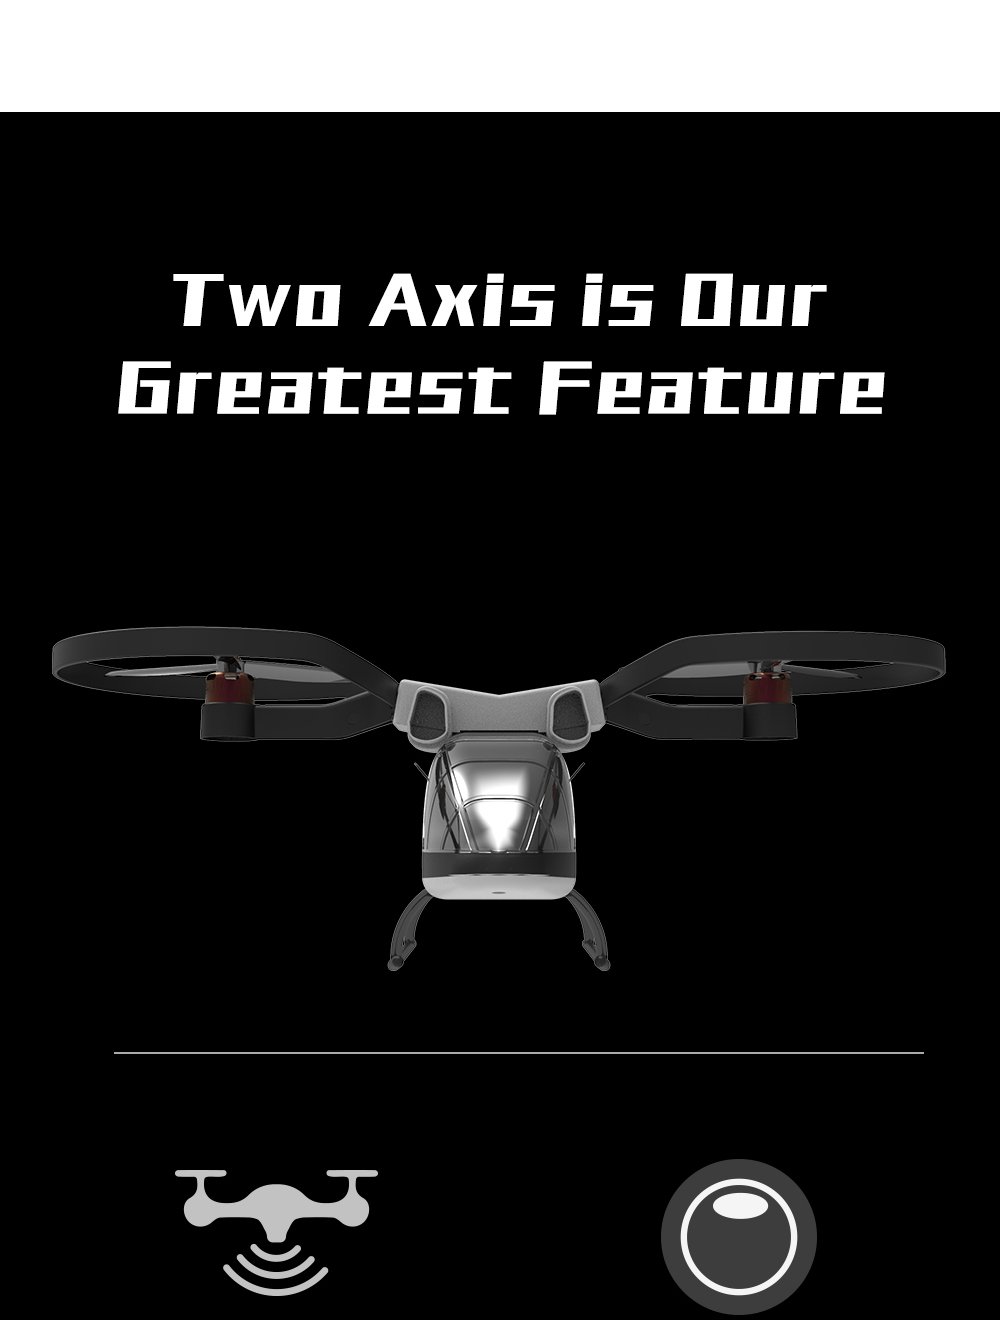 KY-Z2 6CH Two-axis Brushless Helicopter RTF Support GPS Return One Key Take Off